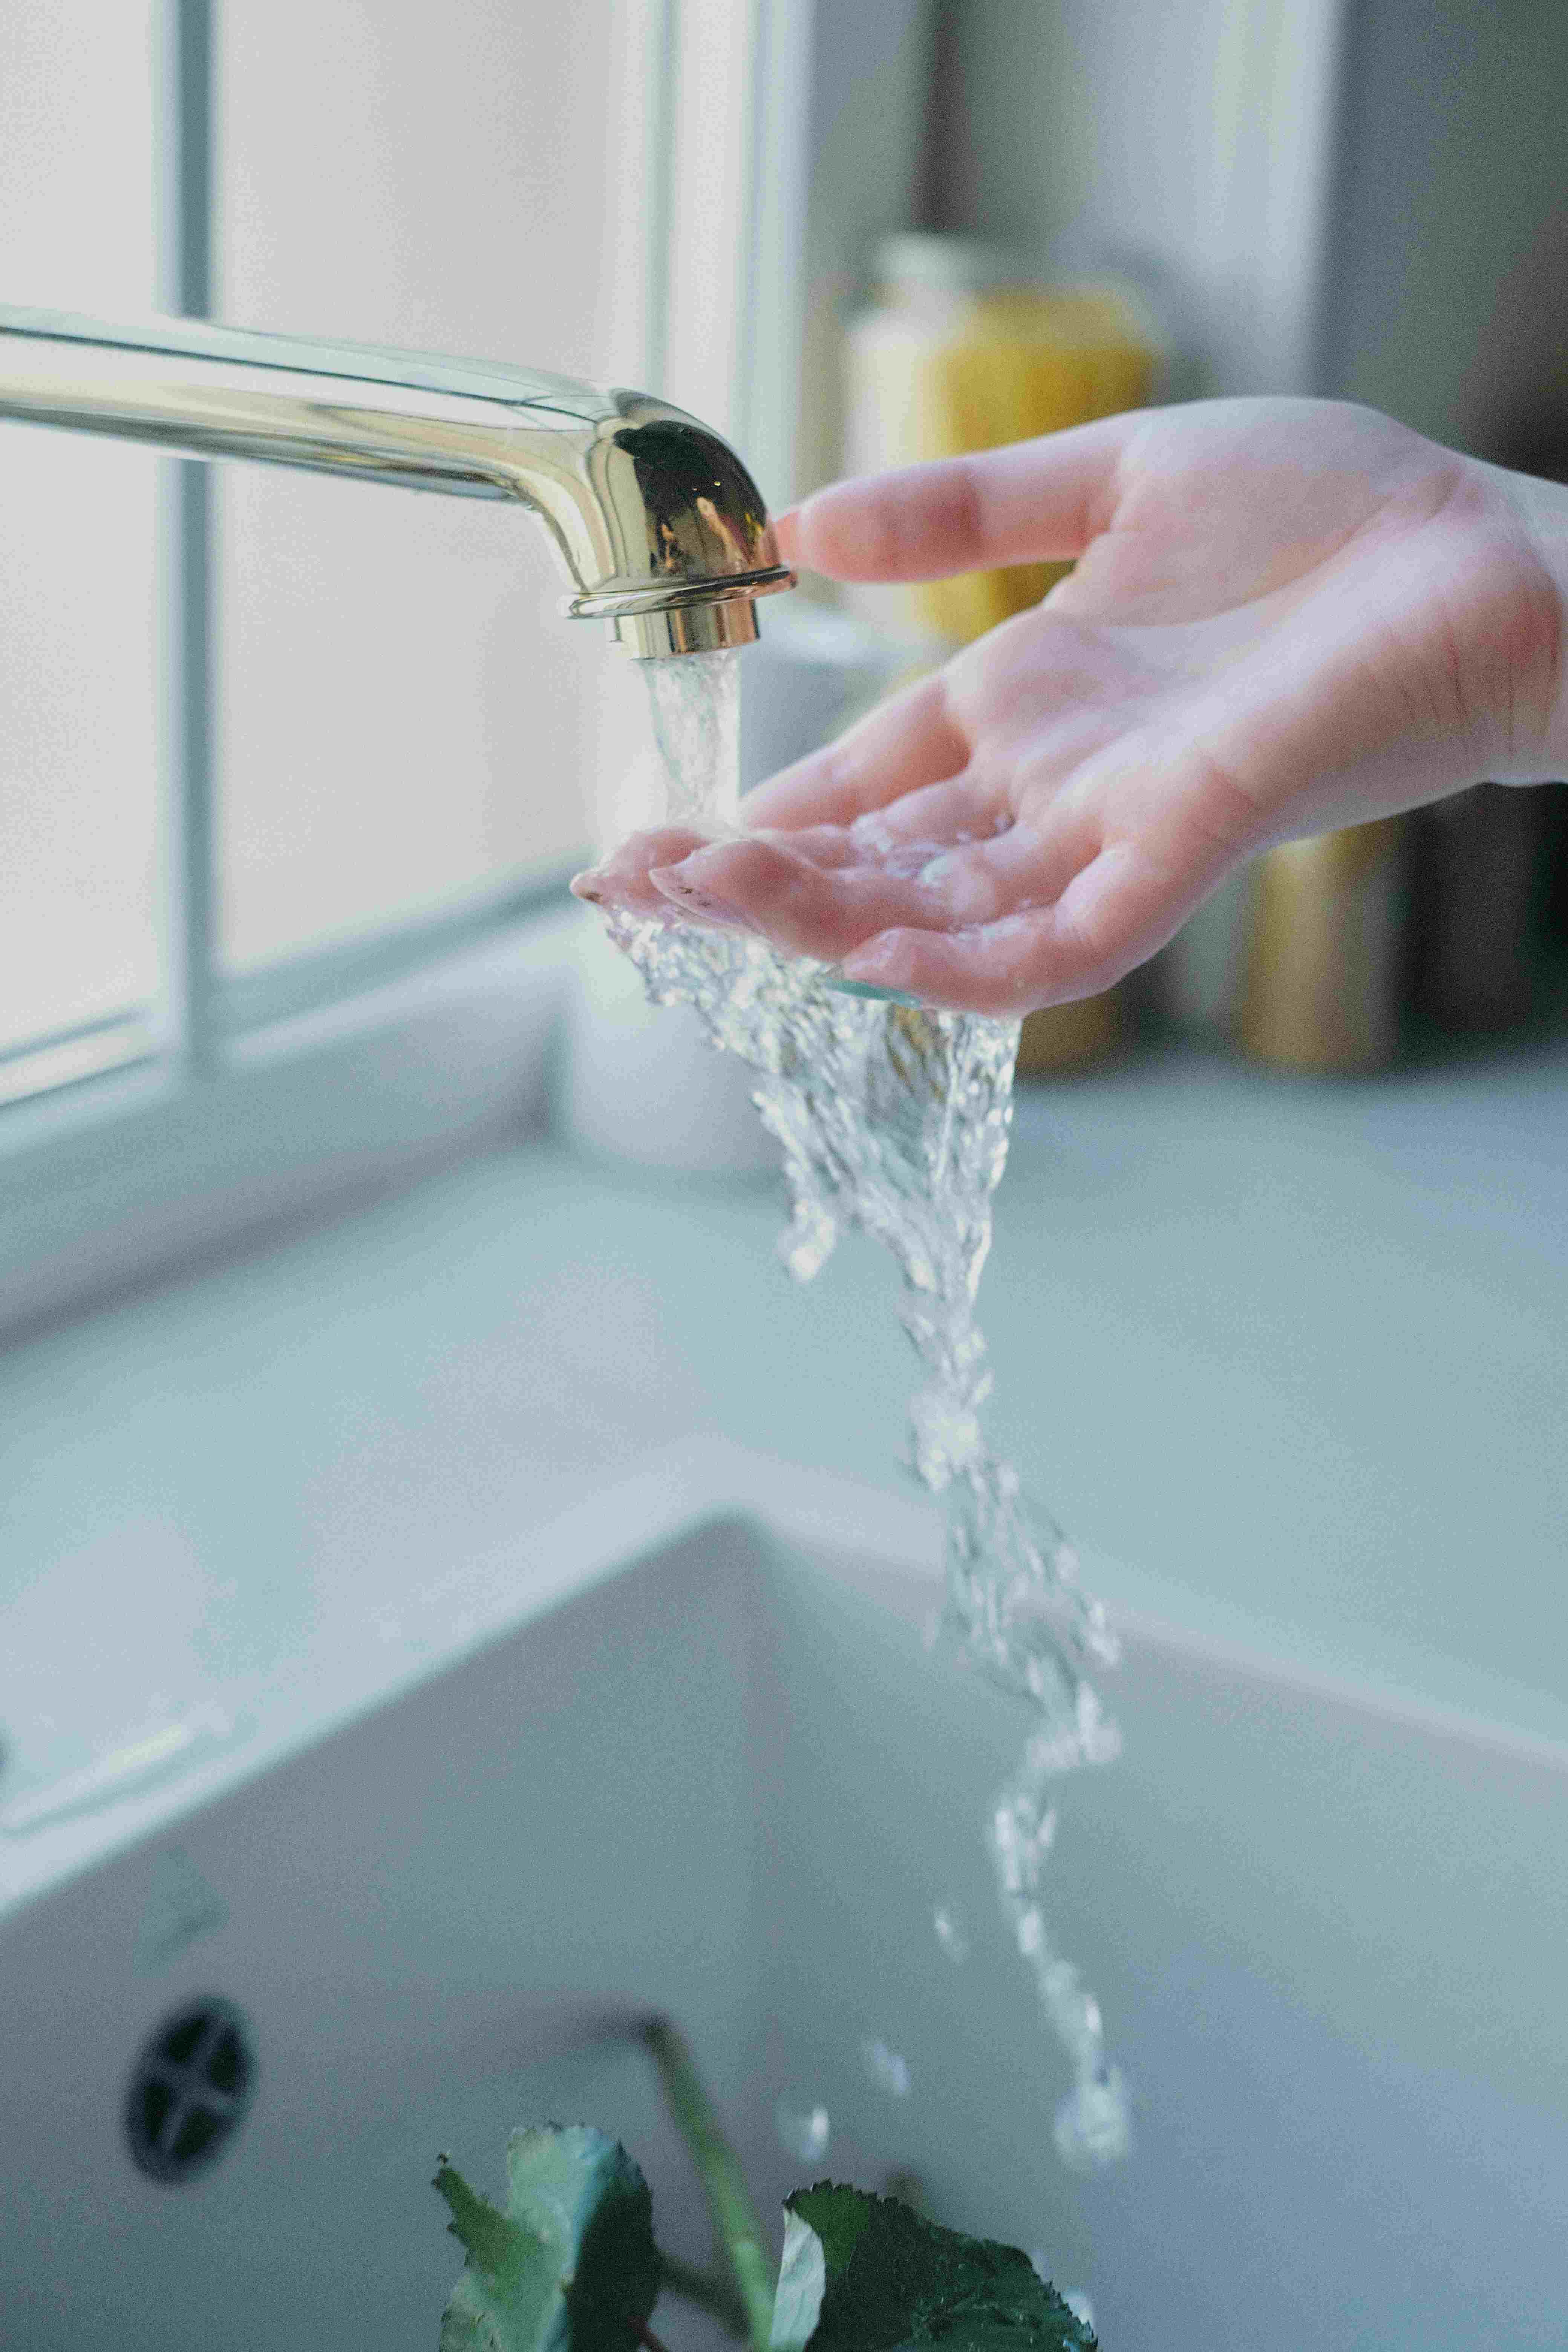 Water running through a woman's hand at a sink. Utility Connect feature, complimentary solutions provided by Accurate Title Services in Madisonville, Louisiana.